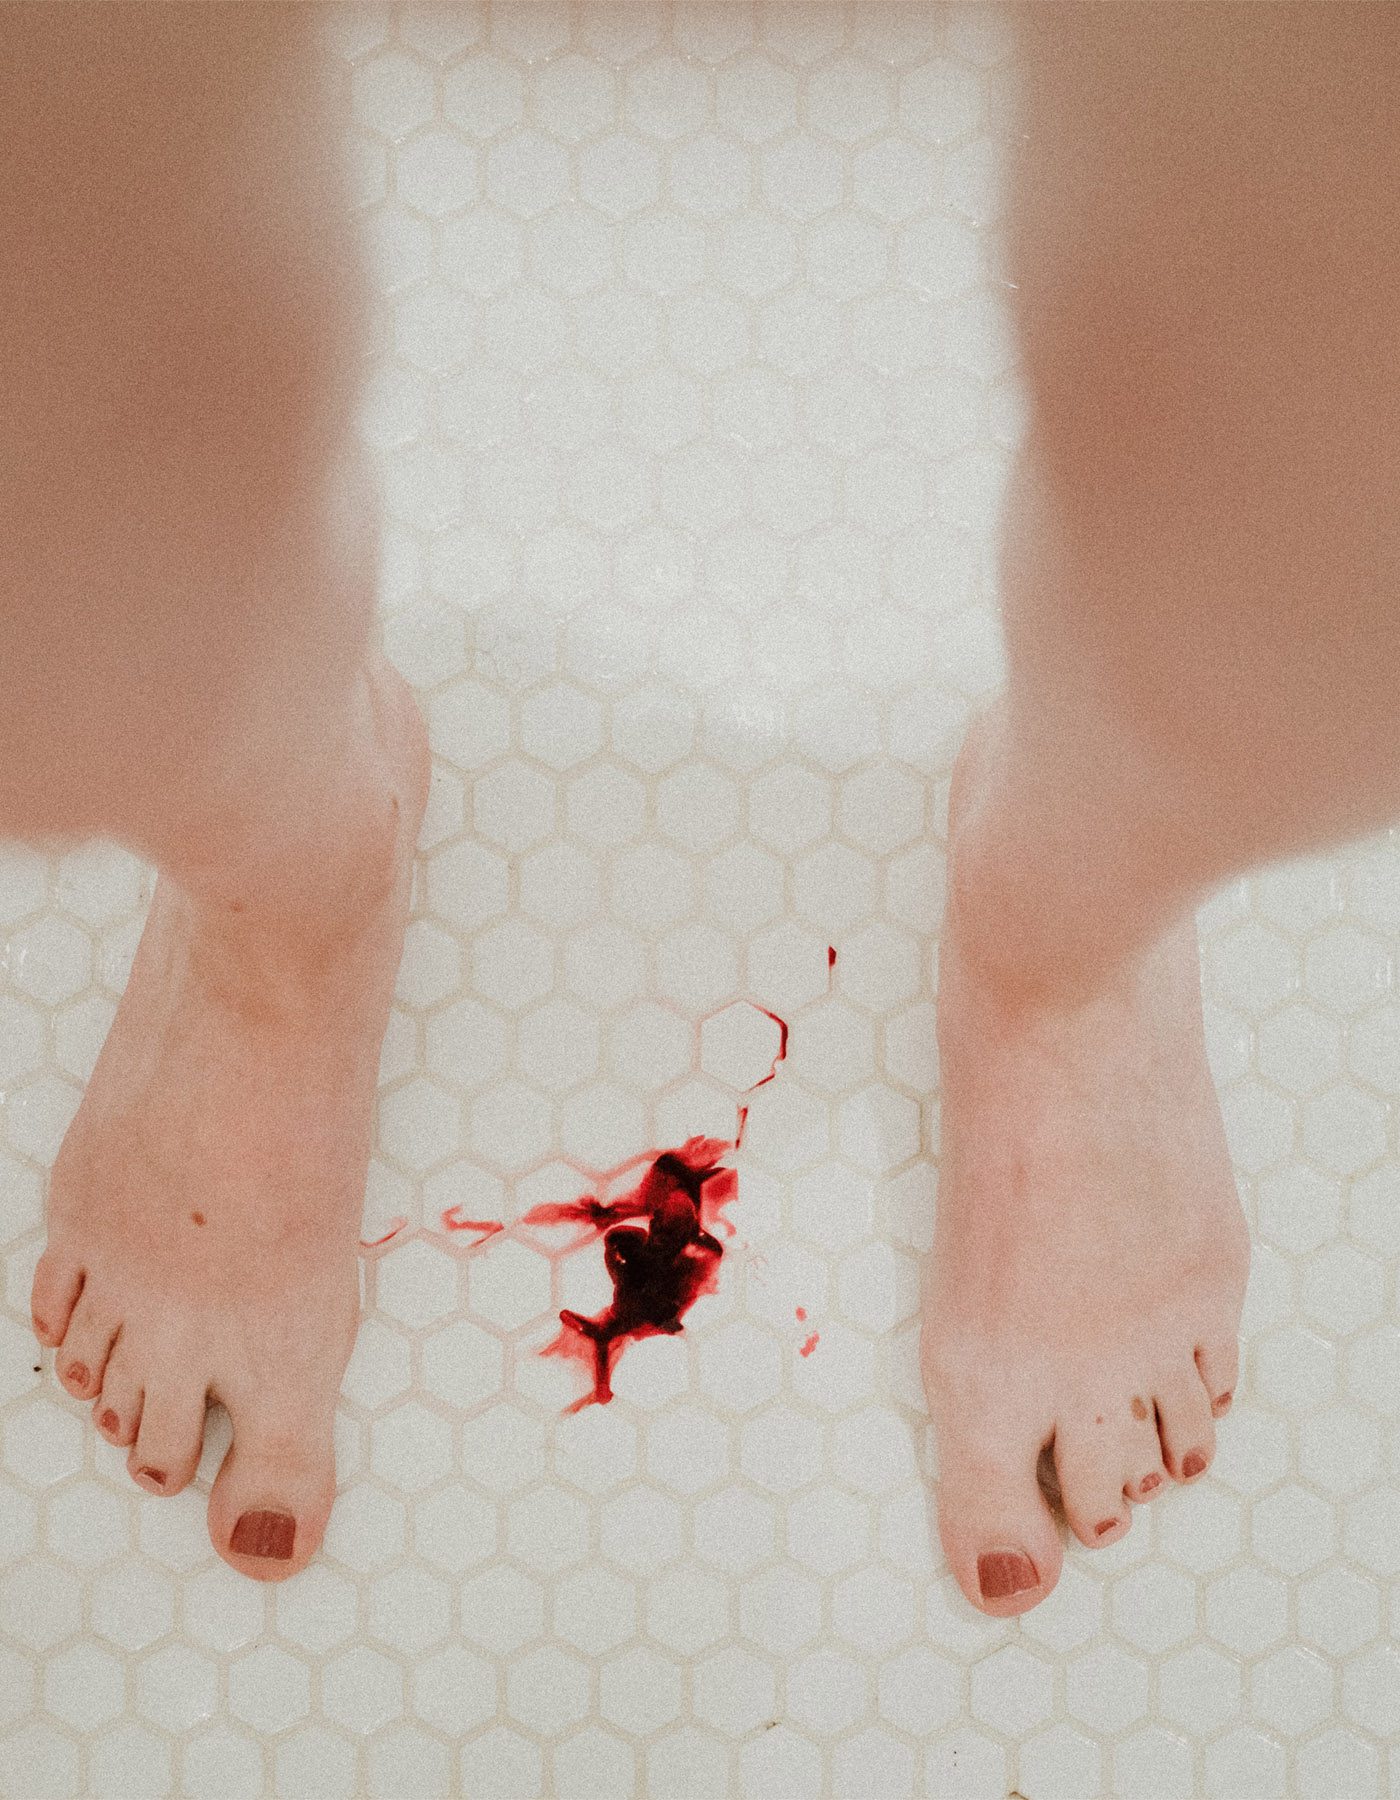 What is free bleeding, really?